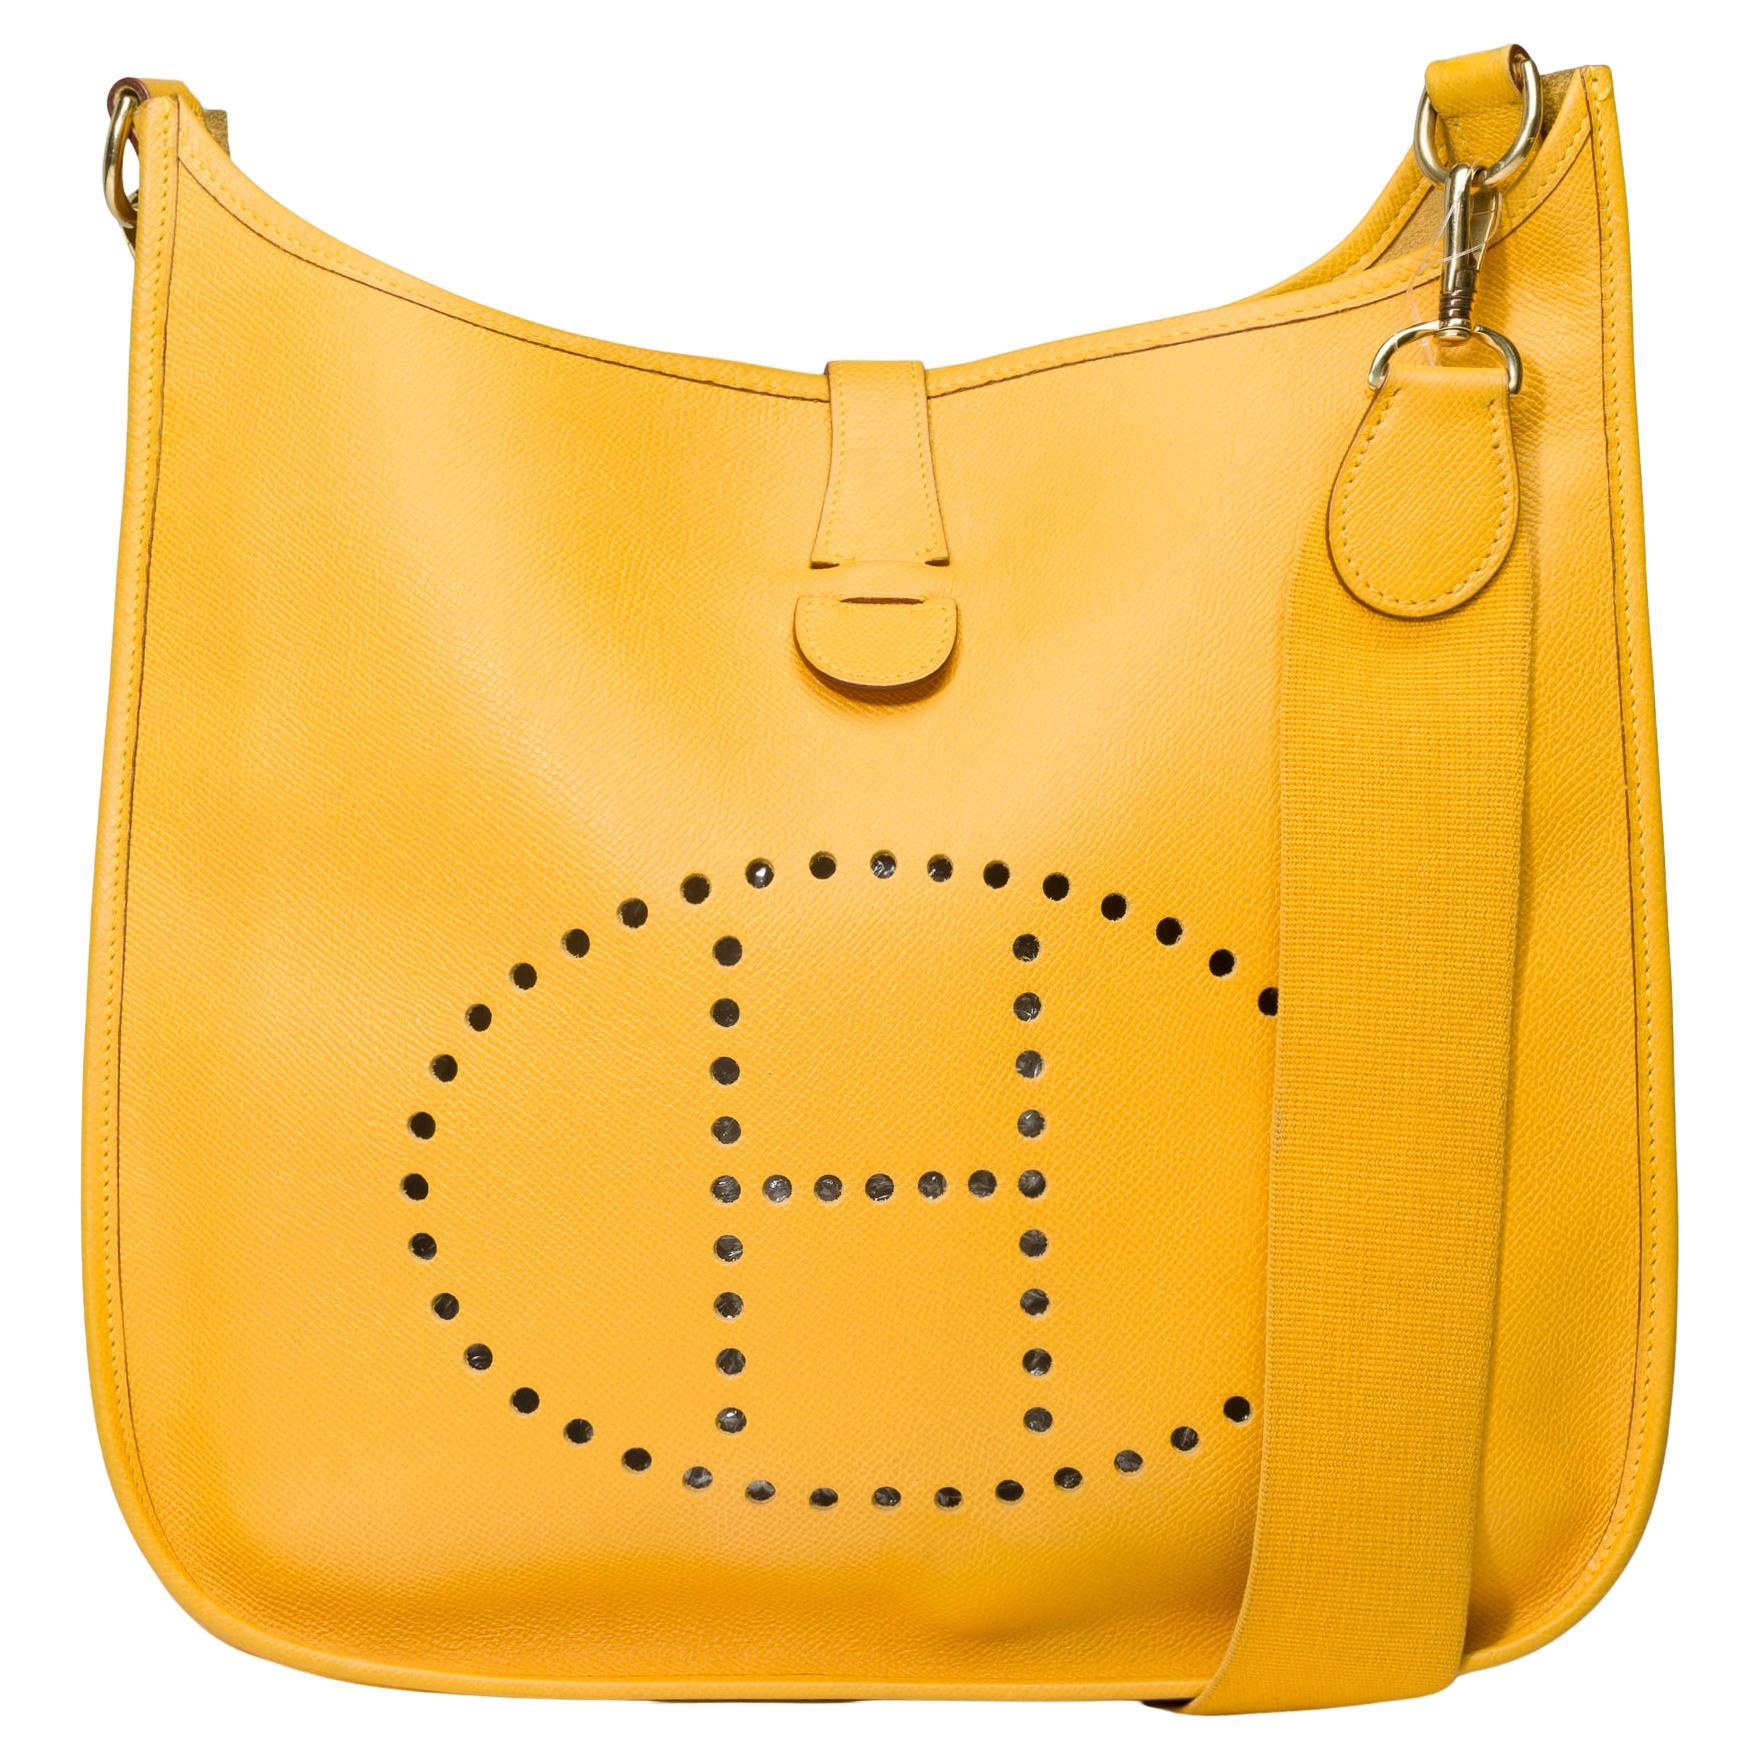 Hermès Evelyne 33 (GM)  shoulder bag in Yellow Gold Courchevel leather, GHW